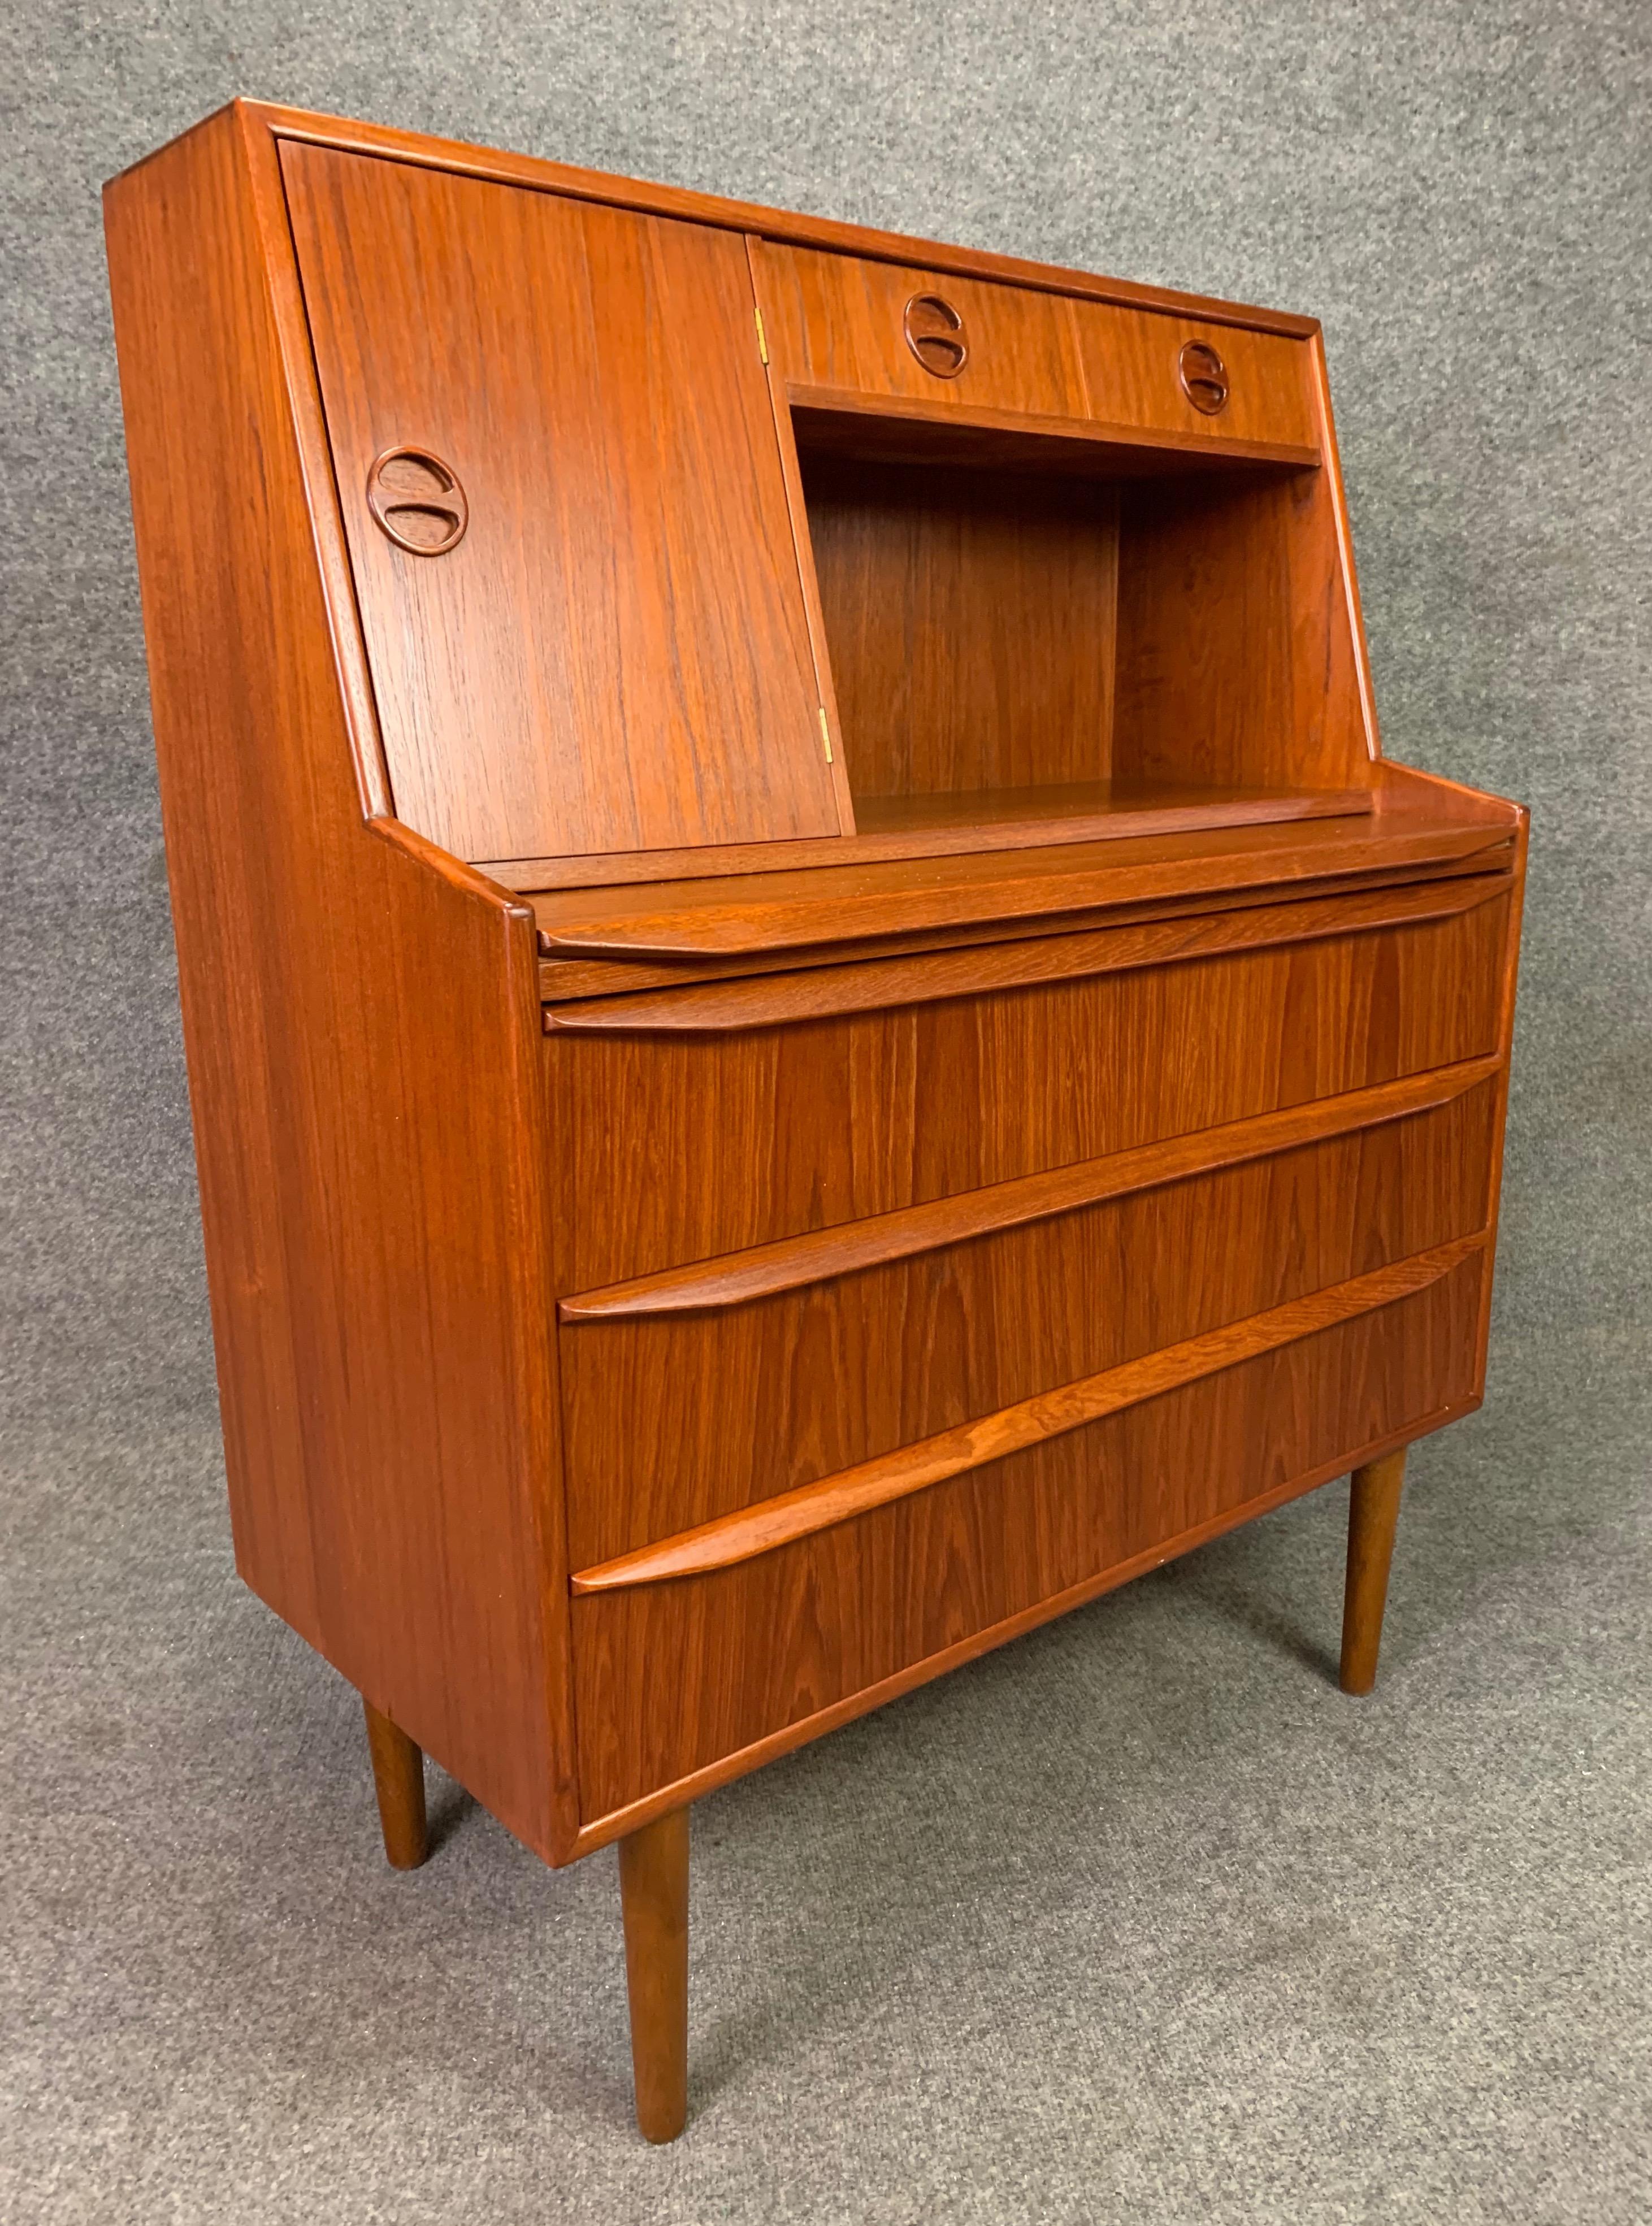 Here is a beautiful 1960s Scandinavian Modern secretary desk in teak recently imported from Denmark to California.
This piece, just cleaned up and oiled, features at its top a door revealing a mirror and a cubby with one shelf and two drawers with